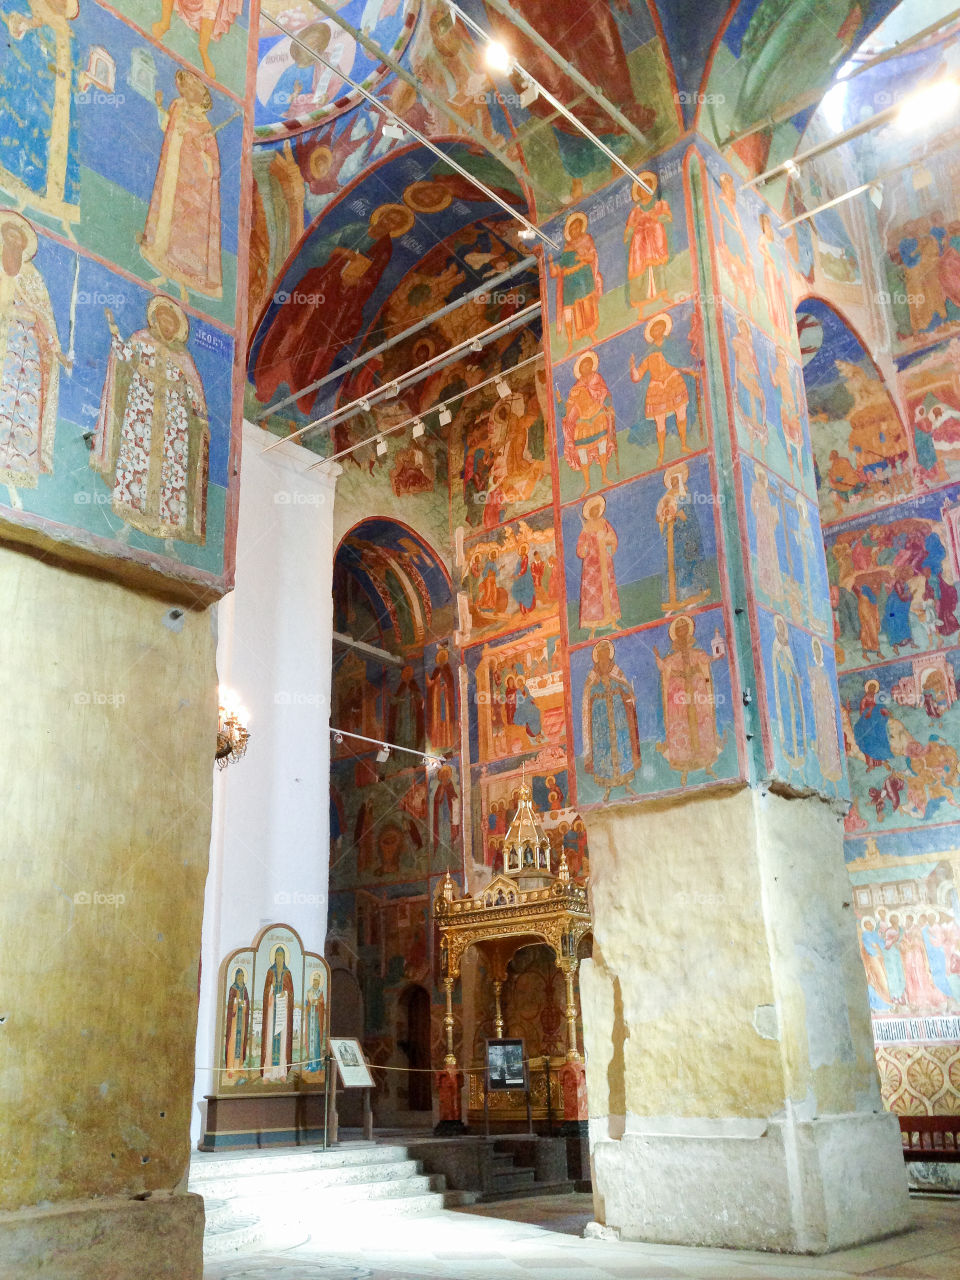 Frescoes inside the Transfiguration Cathedral of the Saviour Monastery of St. Euthymius, Russia, Suzdal